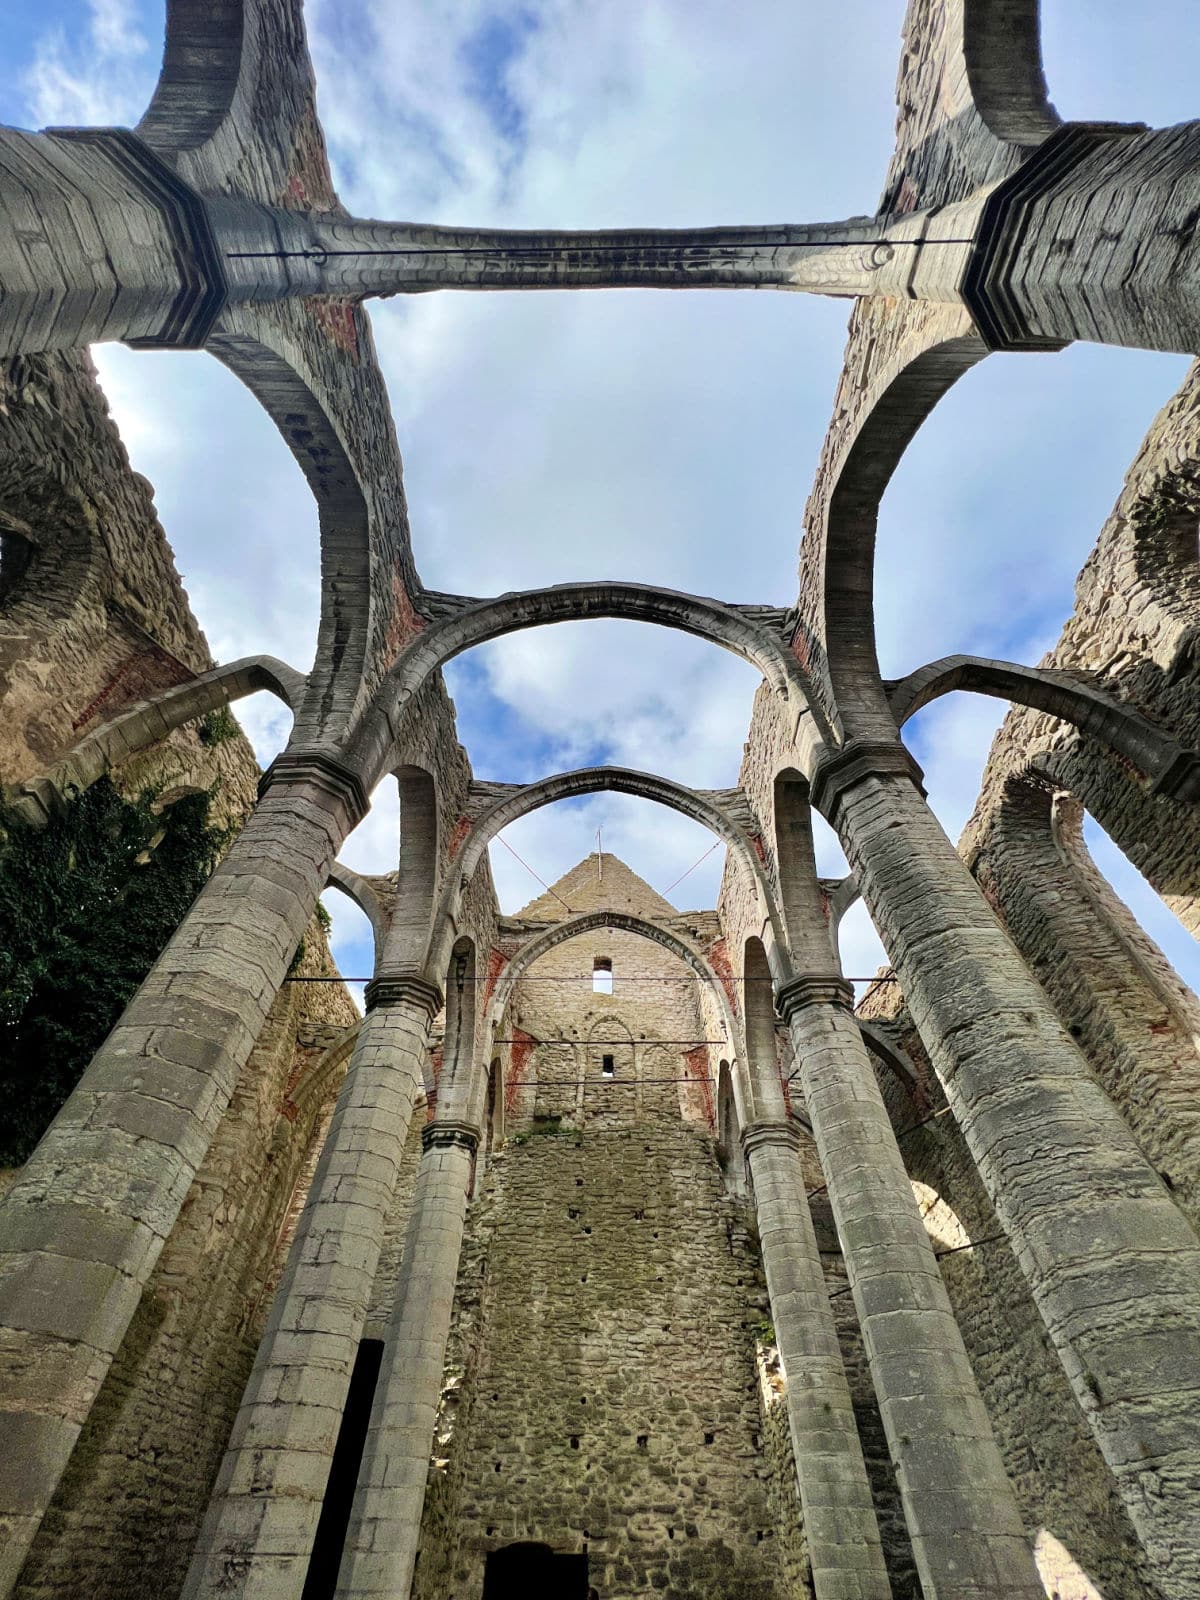 The inside of a ruined building with arches.